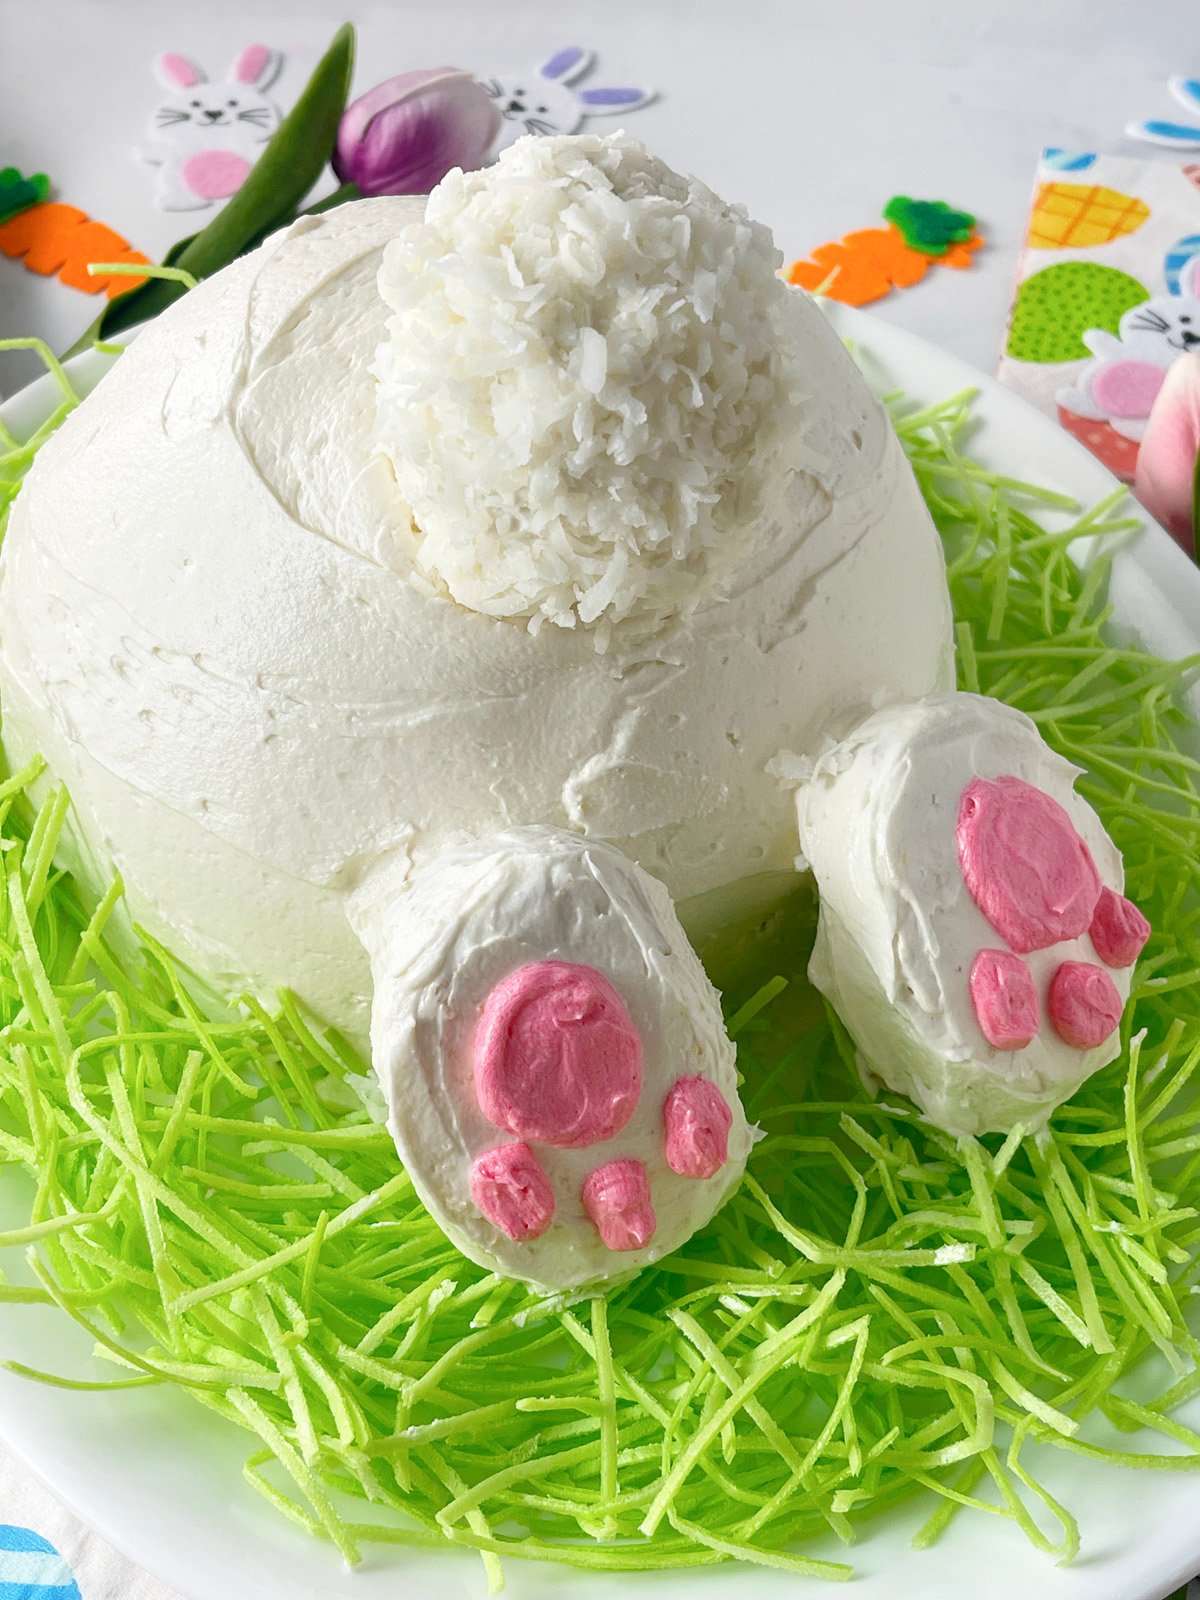 Vanilla cake that looks like a bunny butt for Easter.